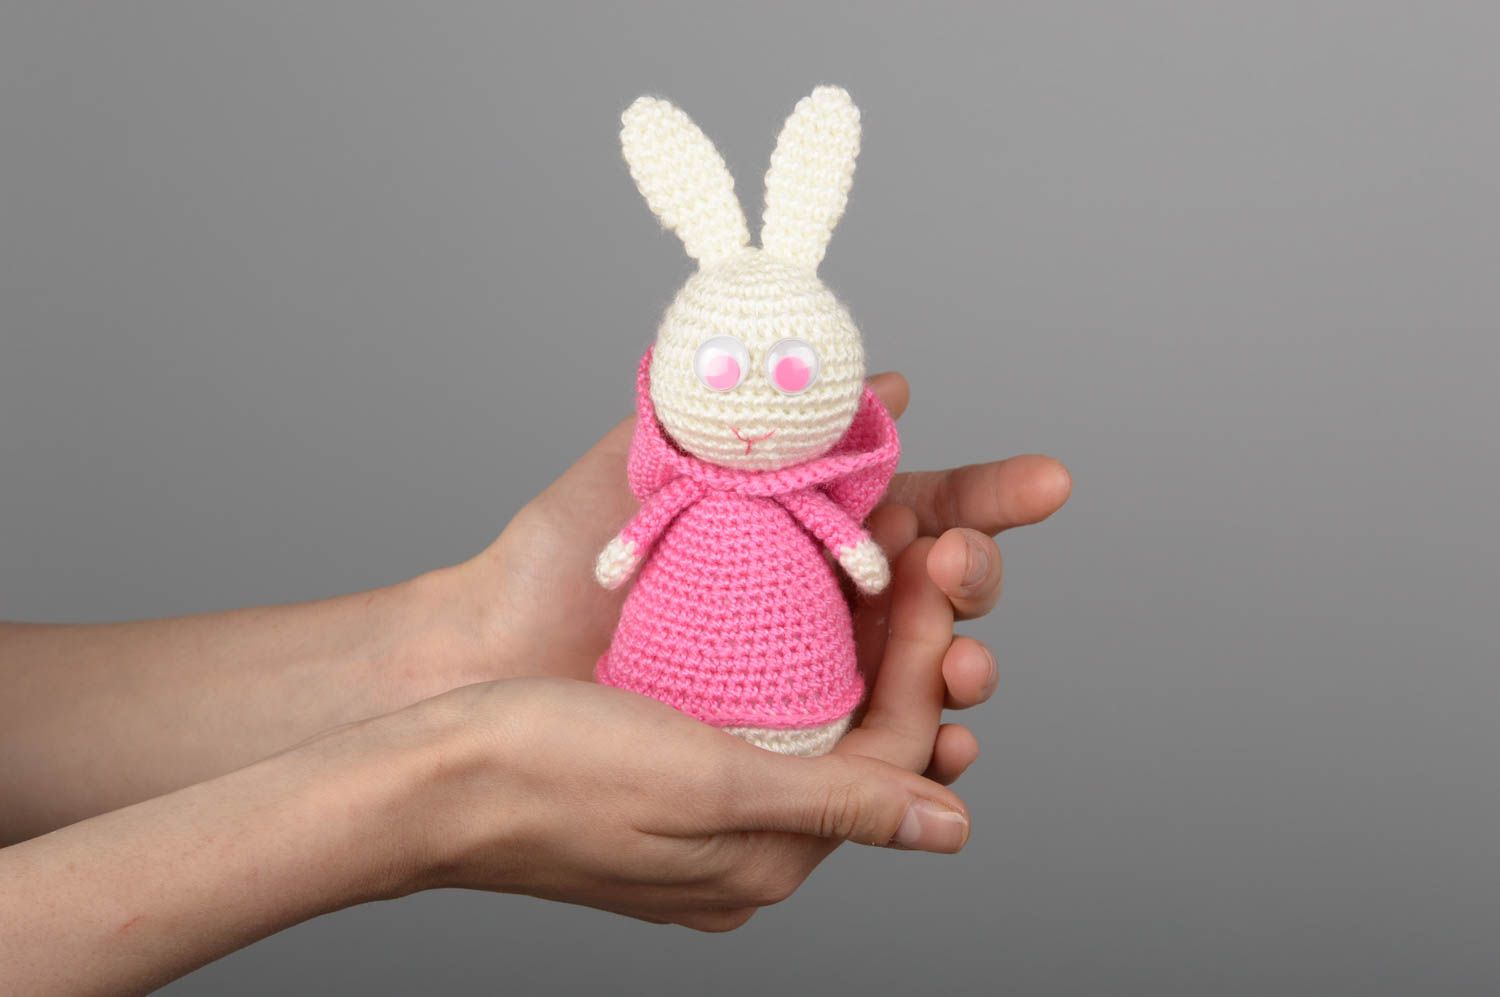 Beautiful handmade crochet soft toy best toys for kids stuffed toy gift ideas photo 5